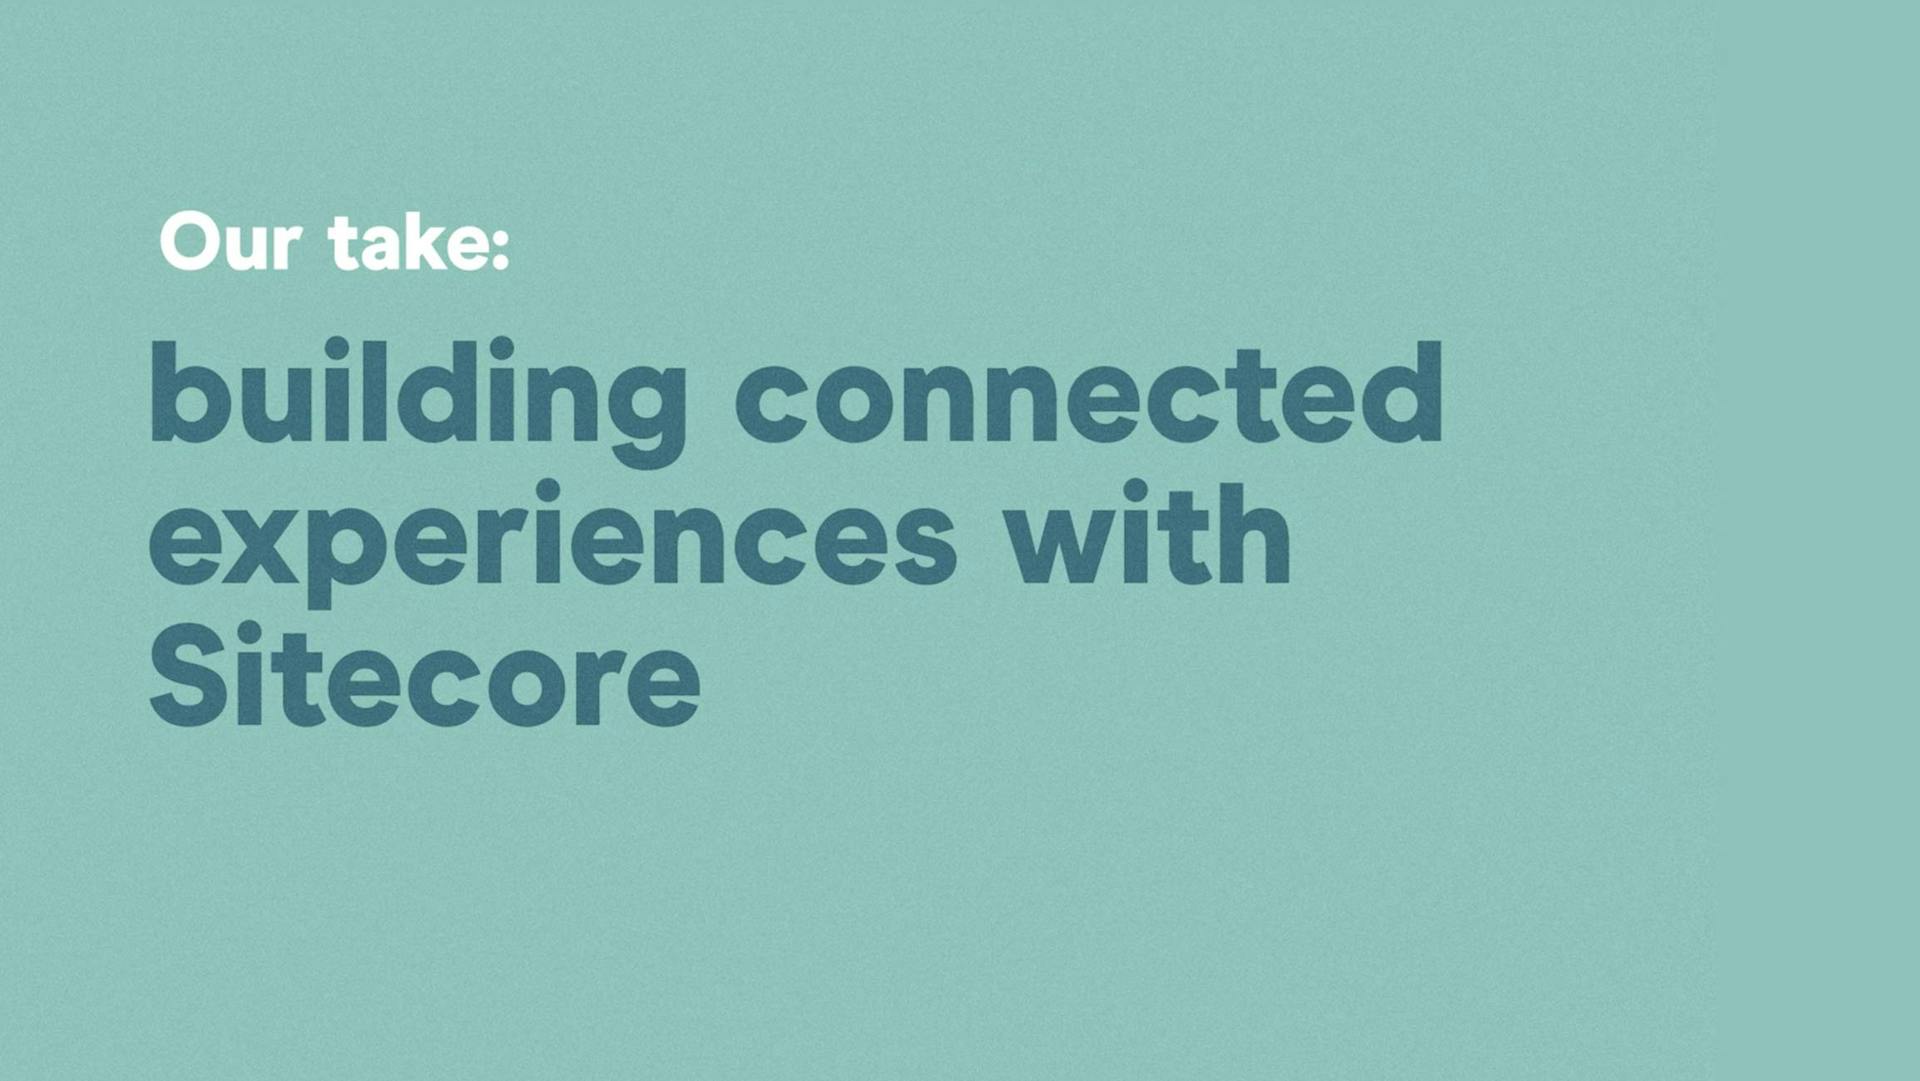 Our take: building connected experiences with Sitecore